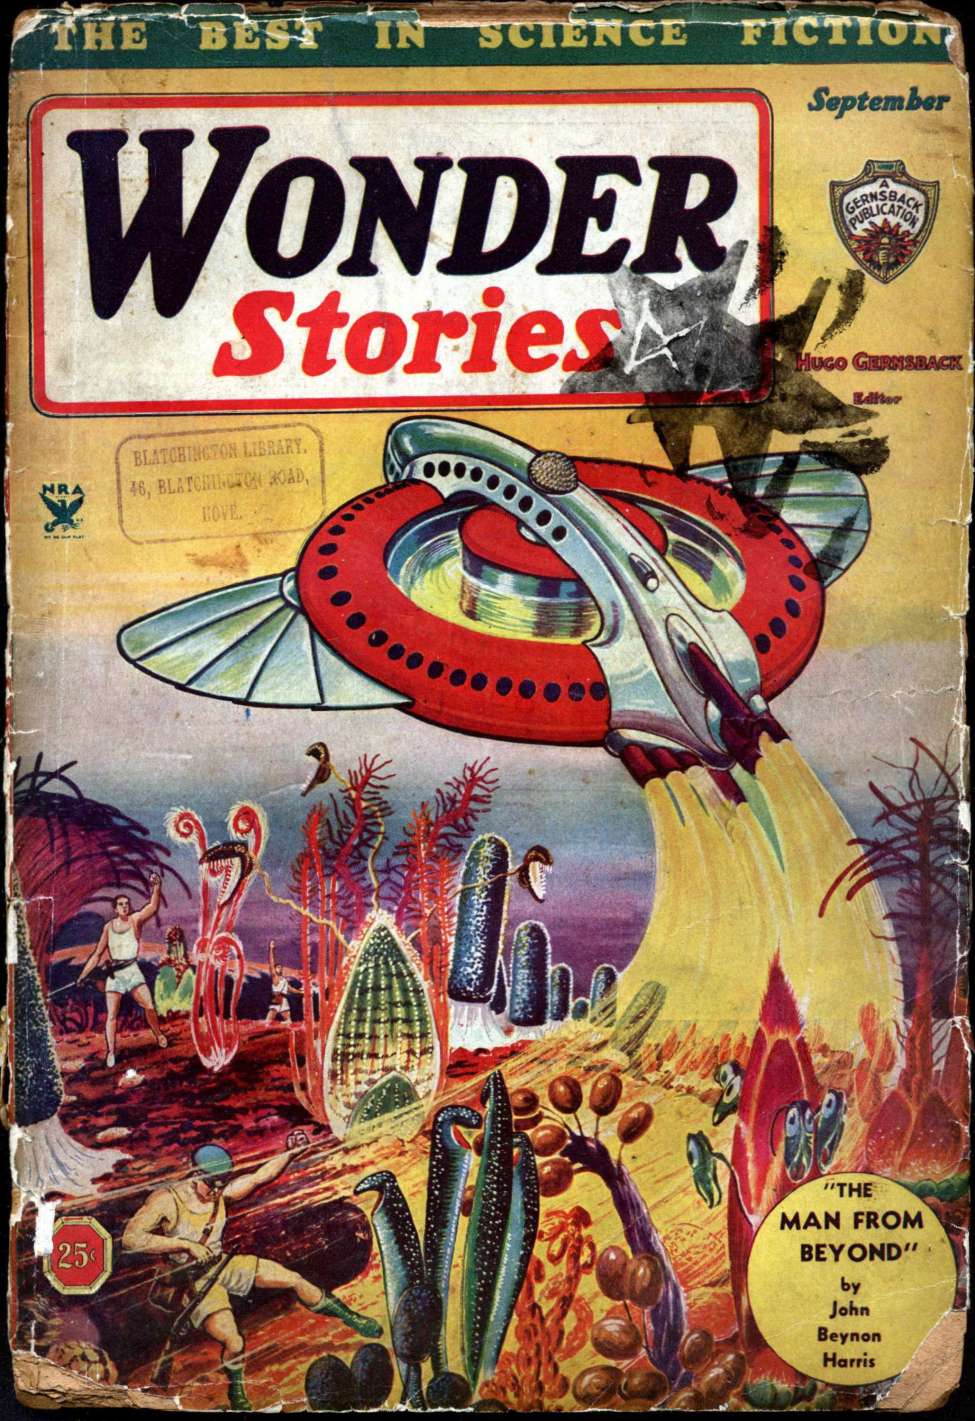 Book Cover For Wonder Stories v6 4 - The Fall of the Eiffel Tower - Charles de Richter